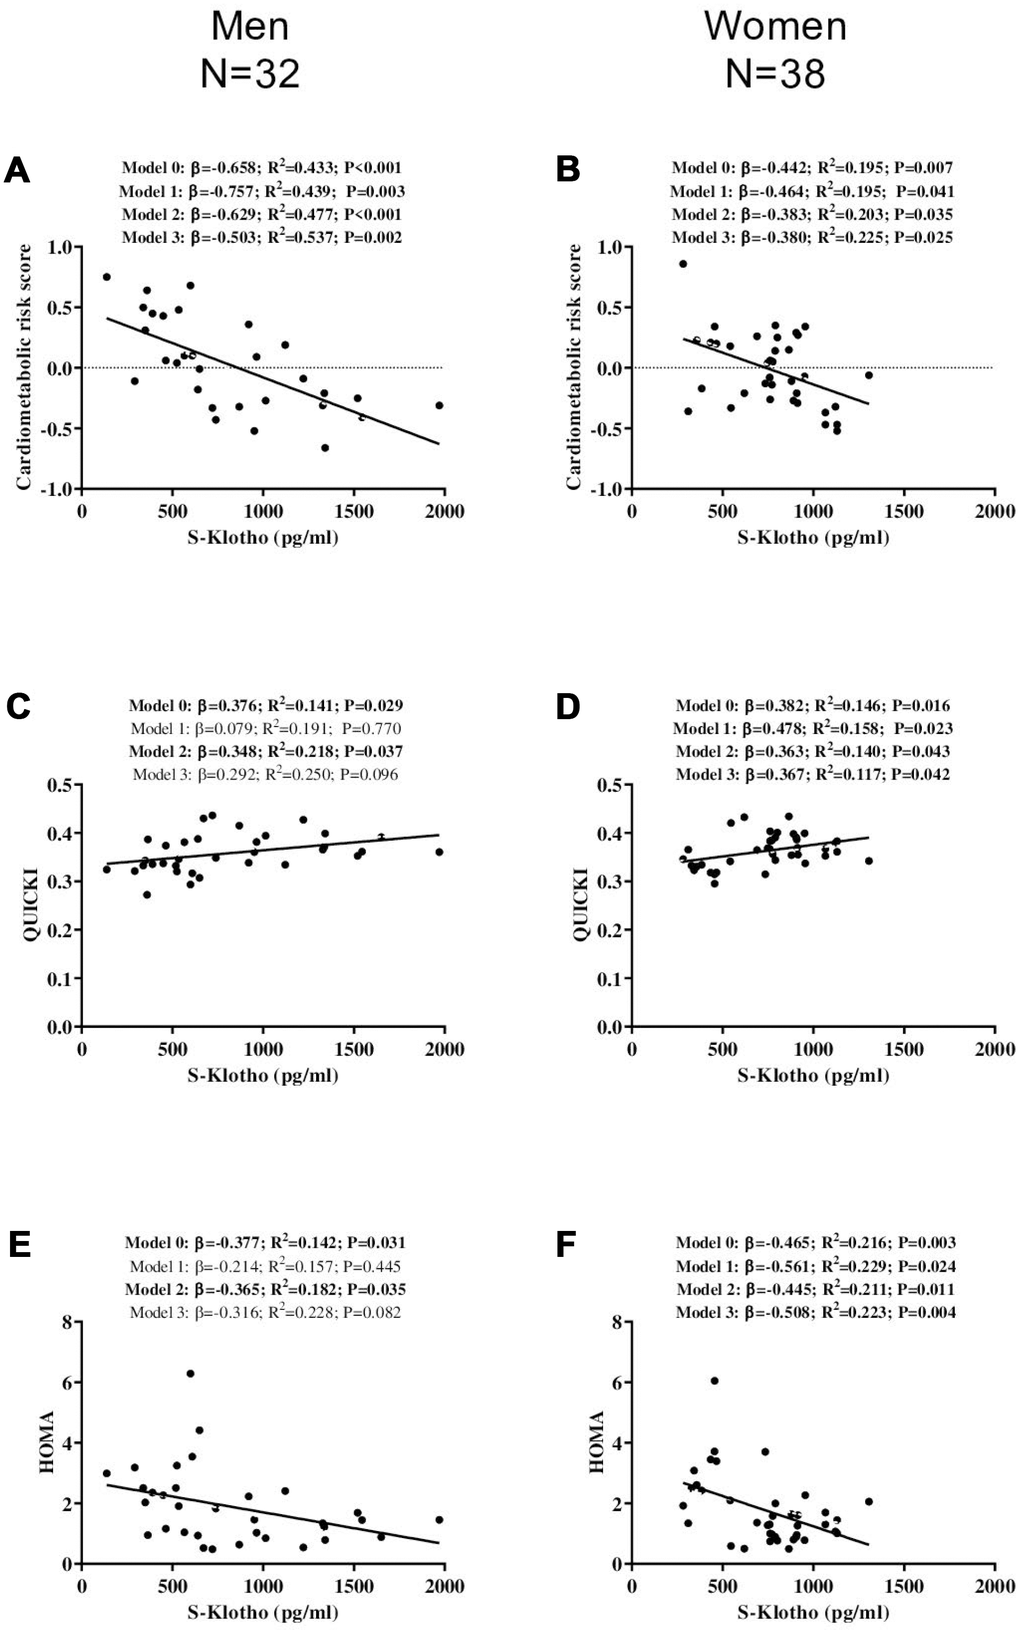 Association between S-Klotho and the cardiometabolic risk index, the quantitative insulin sensitivity check index (QUICKI), and the homeostatic model assessment of insulin resistance index (HOMA) in middle-aged, sedentary adults. β: standardized regression coefficient; R2 and P are provided for simple and multiple linear regression analyses. Model 0; unadjusted, Model 1; adjusted for age, Model 2; adjusted for energy intake, Model 3; adjusted for cardiorespiratory fitness.